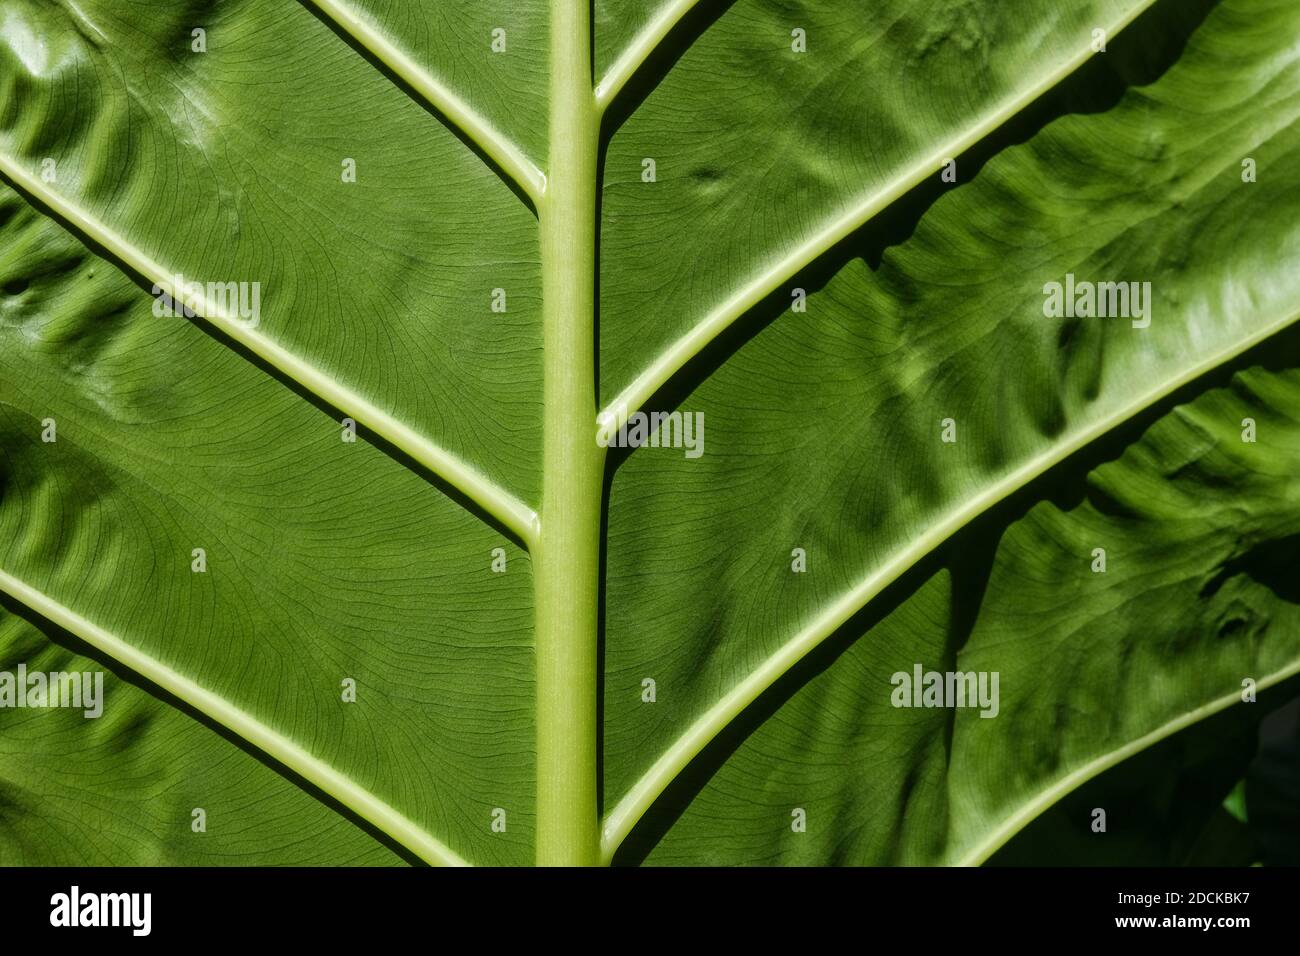 Underside and veins of the leaf of an Alocasia, also known as Elephant Ear Plant Stock Photo